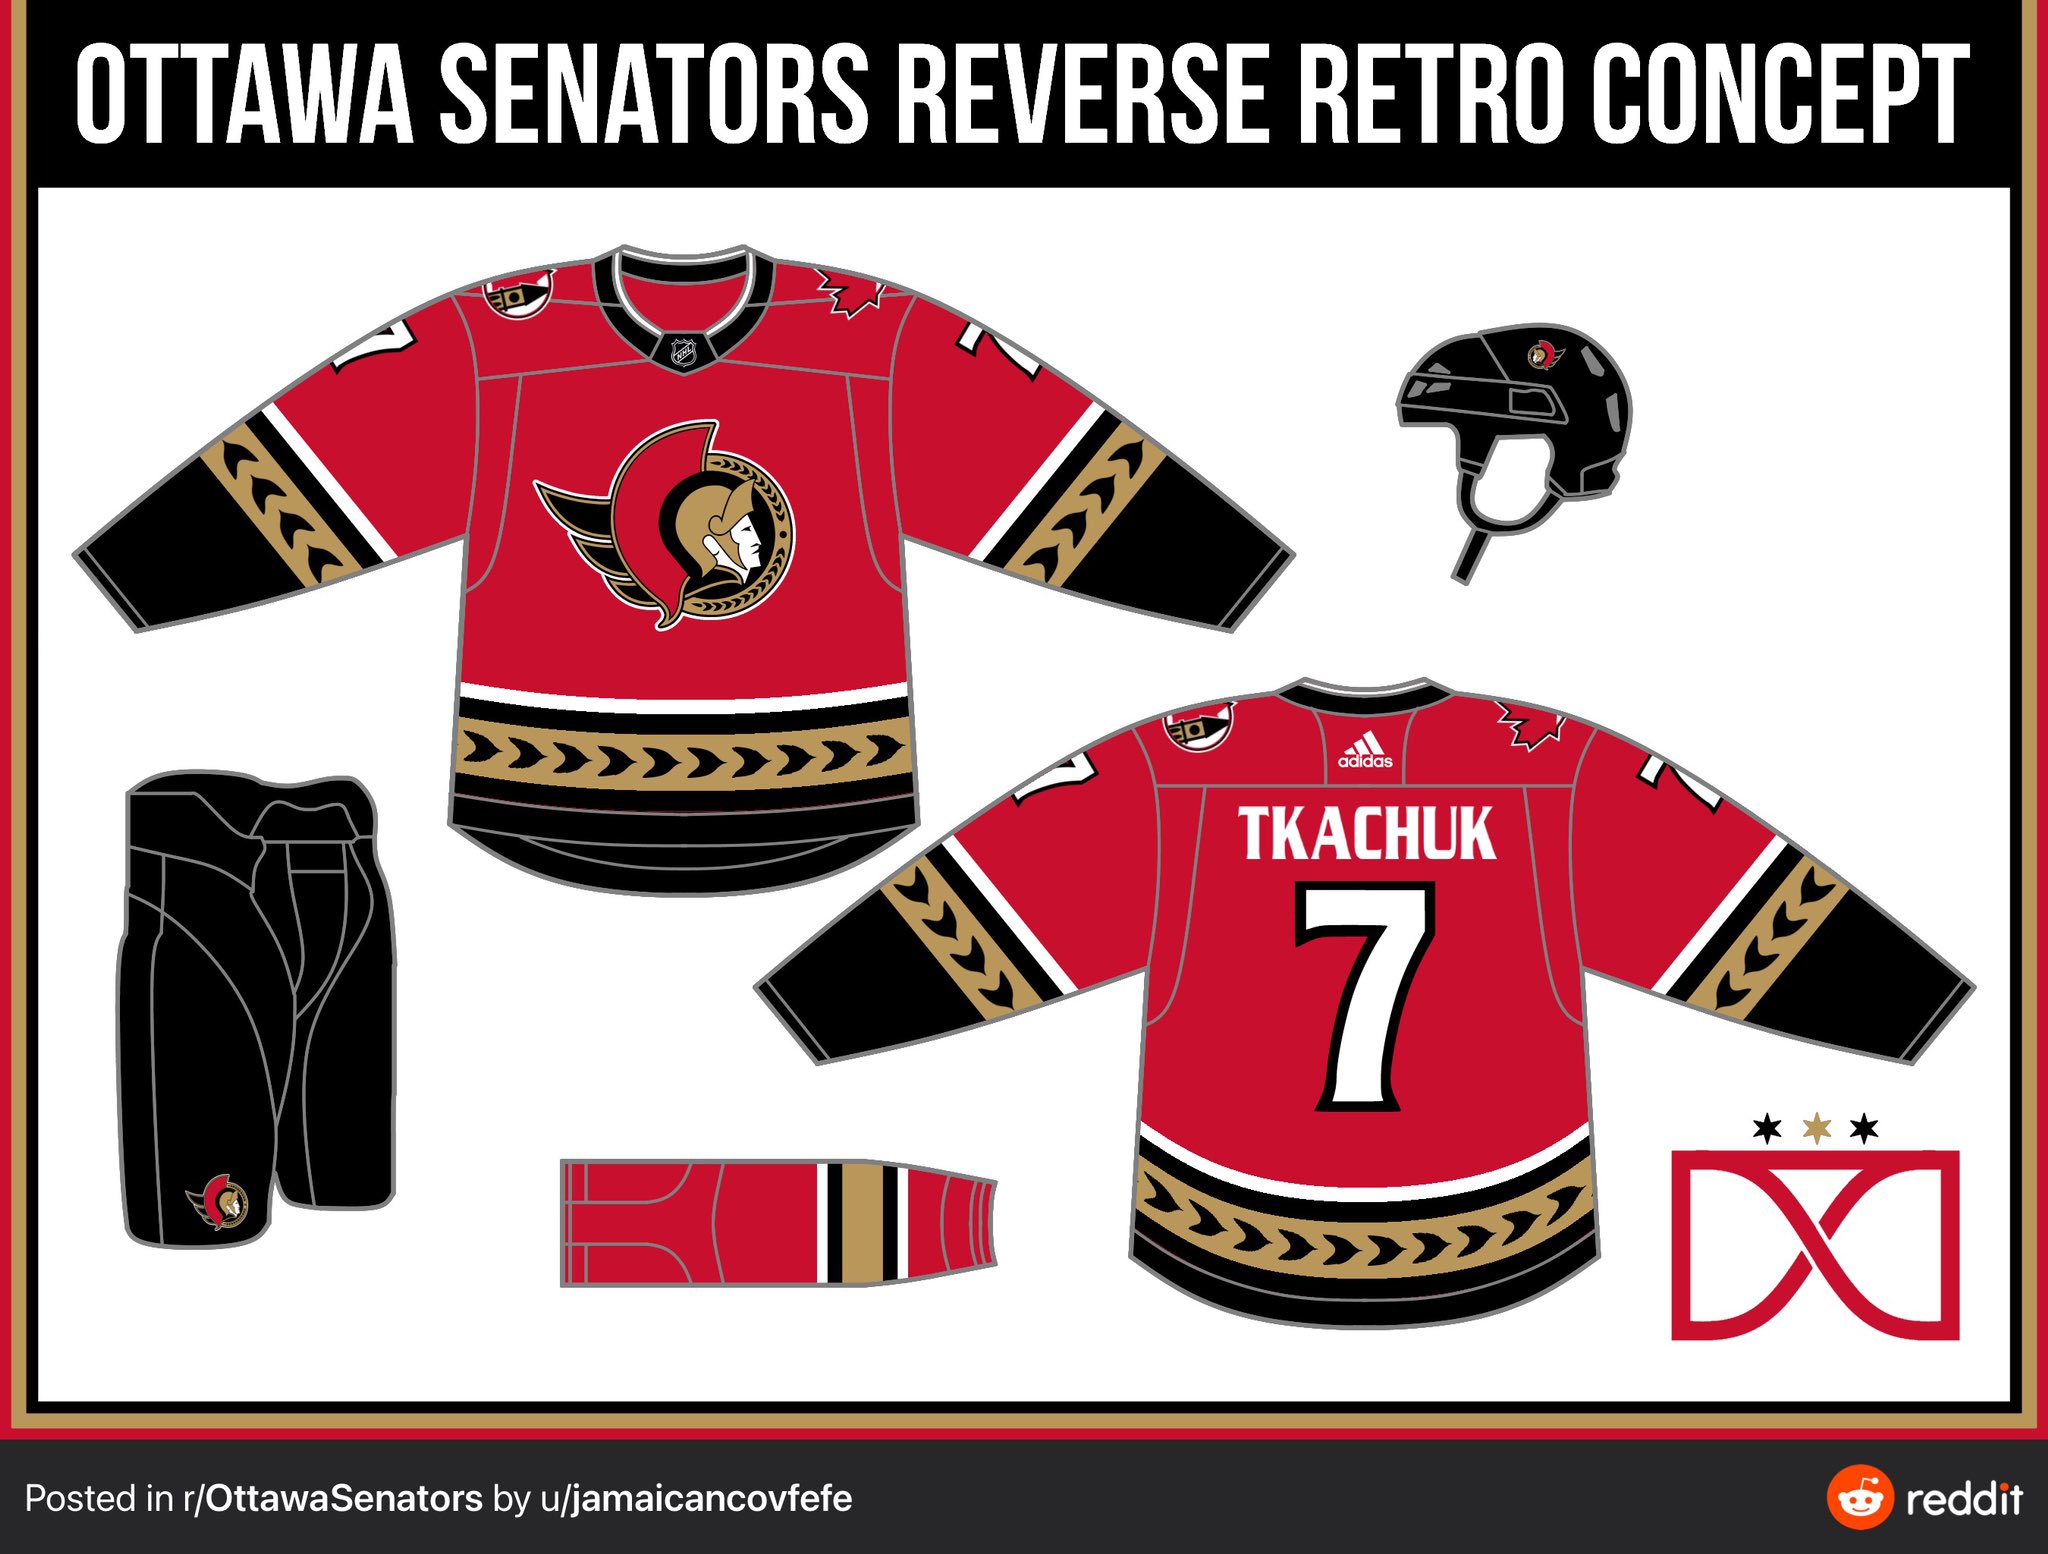 THW Senators on X: Ottawa Senators reverse retro jersey concept, credit to  reddit user r/jamaicancovfefe This concept is a nice nod the one our  previous jerseys, updated with the 2D logo. Surely